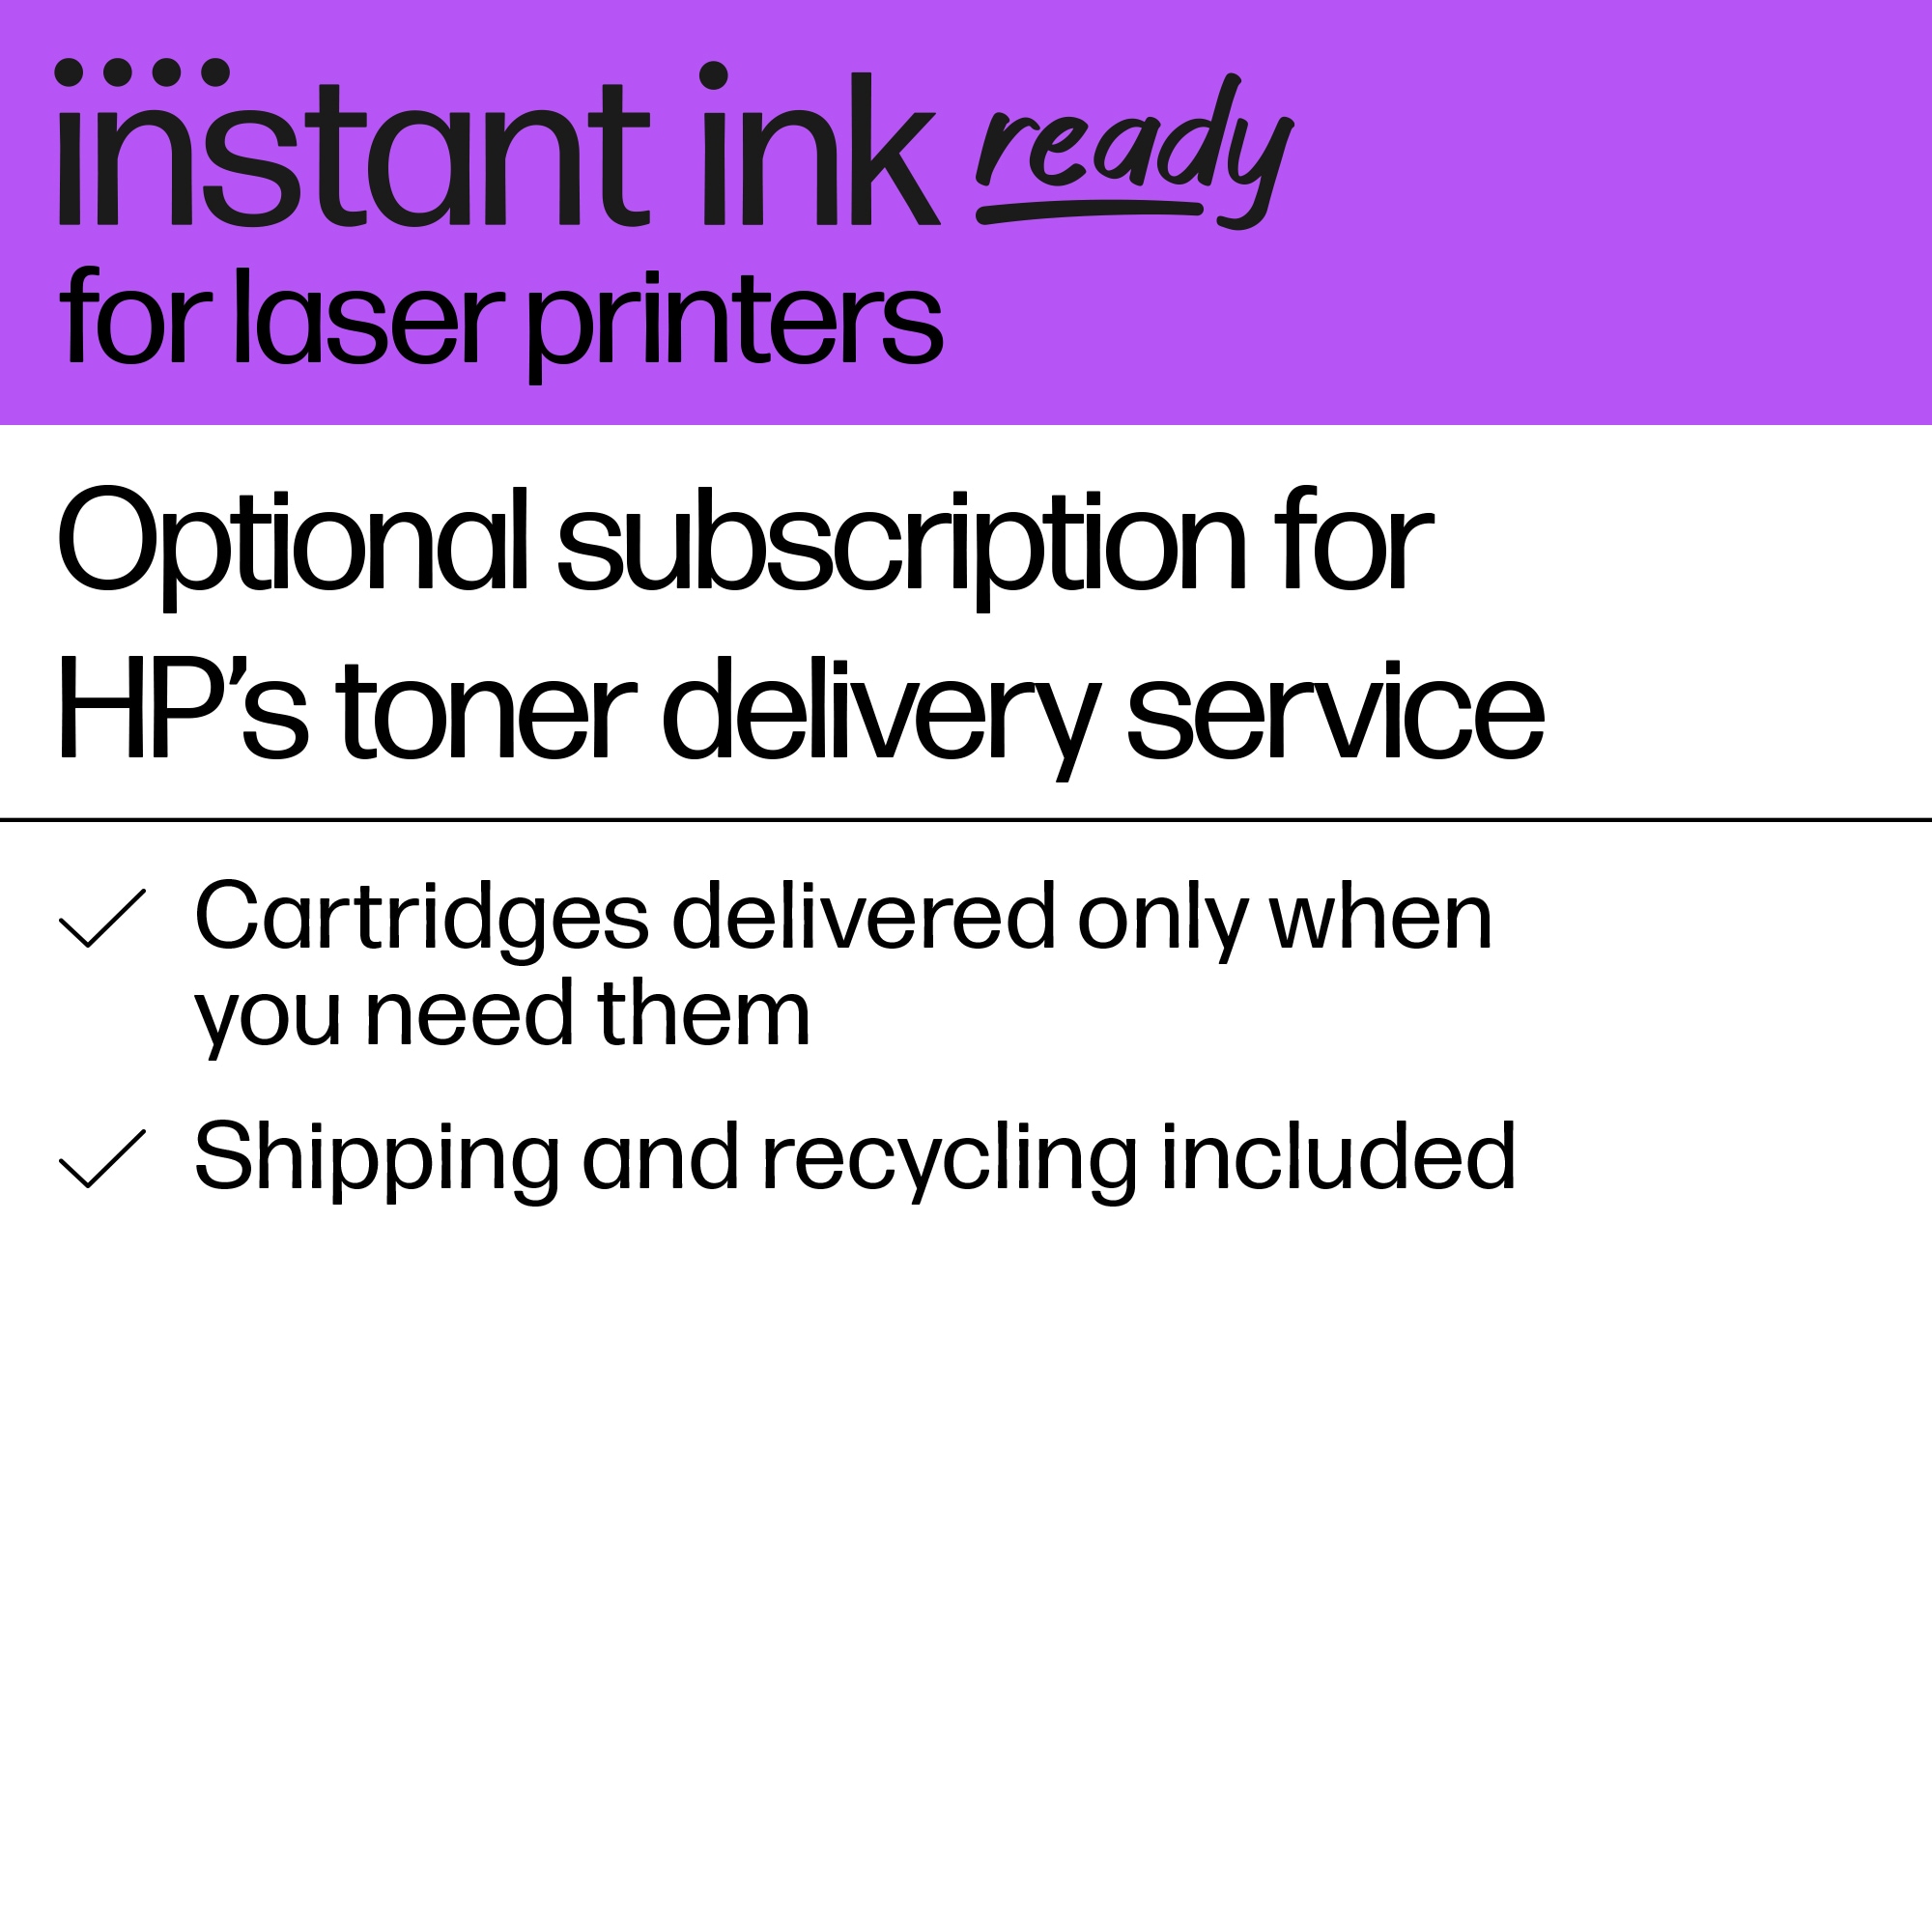 HP LaserJet Printer Ink months available Instant MFP with M234sdw 2